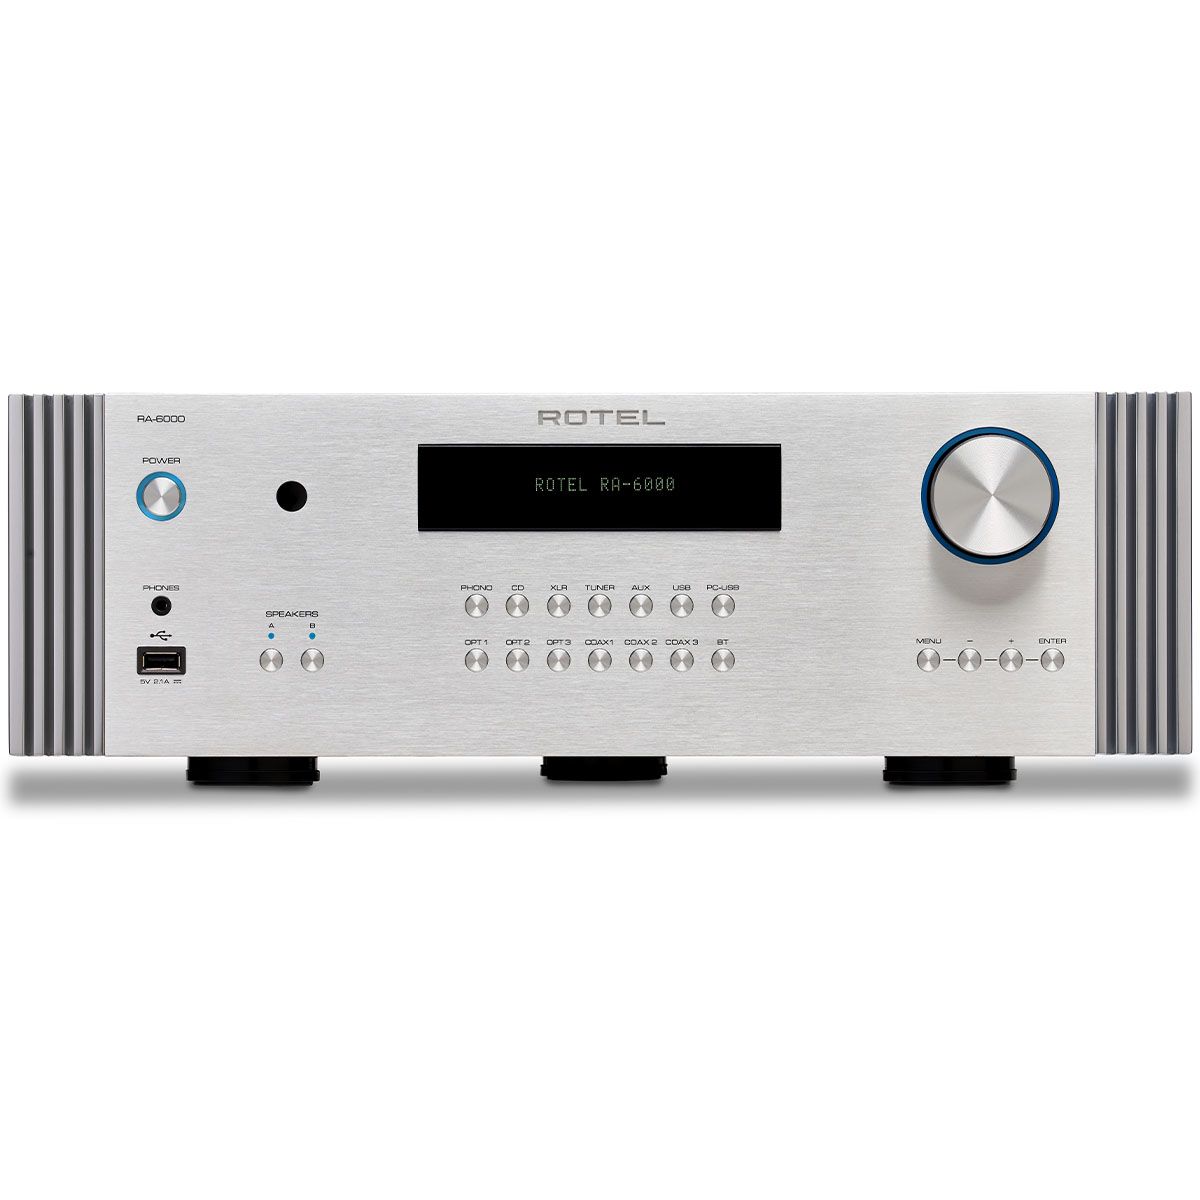 Rotel RA-6000 Integrated Amplifier - Silver - front view